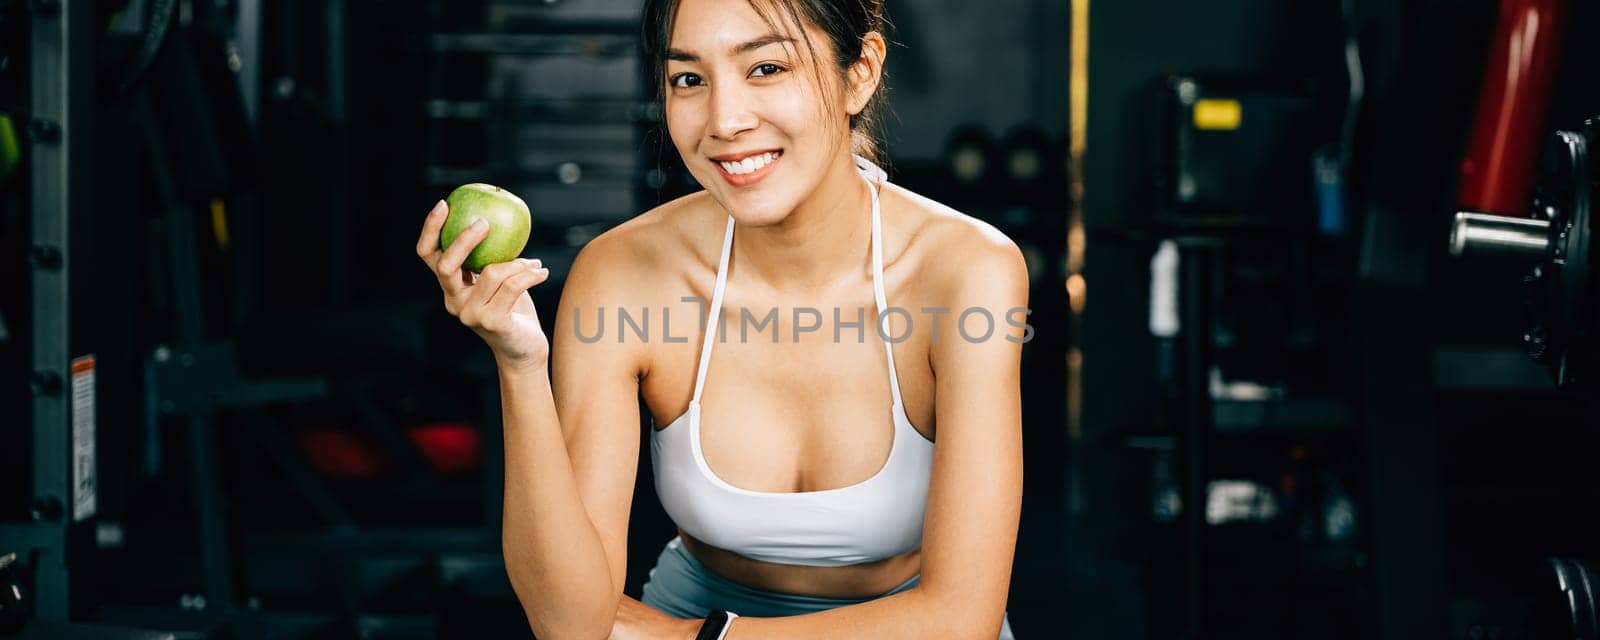 A female runner holds a green apple in a gym, reminding viewers of the importance of healthy food choices for achieving fitness goals. Healthy fitness and eating lifestyle concept